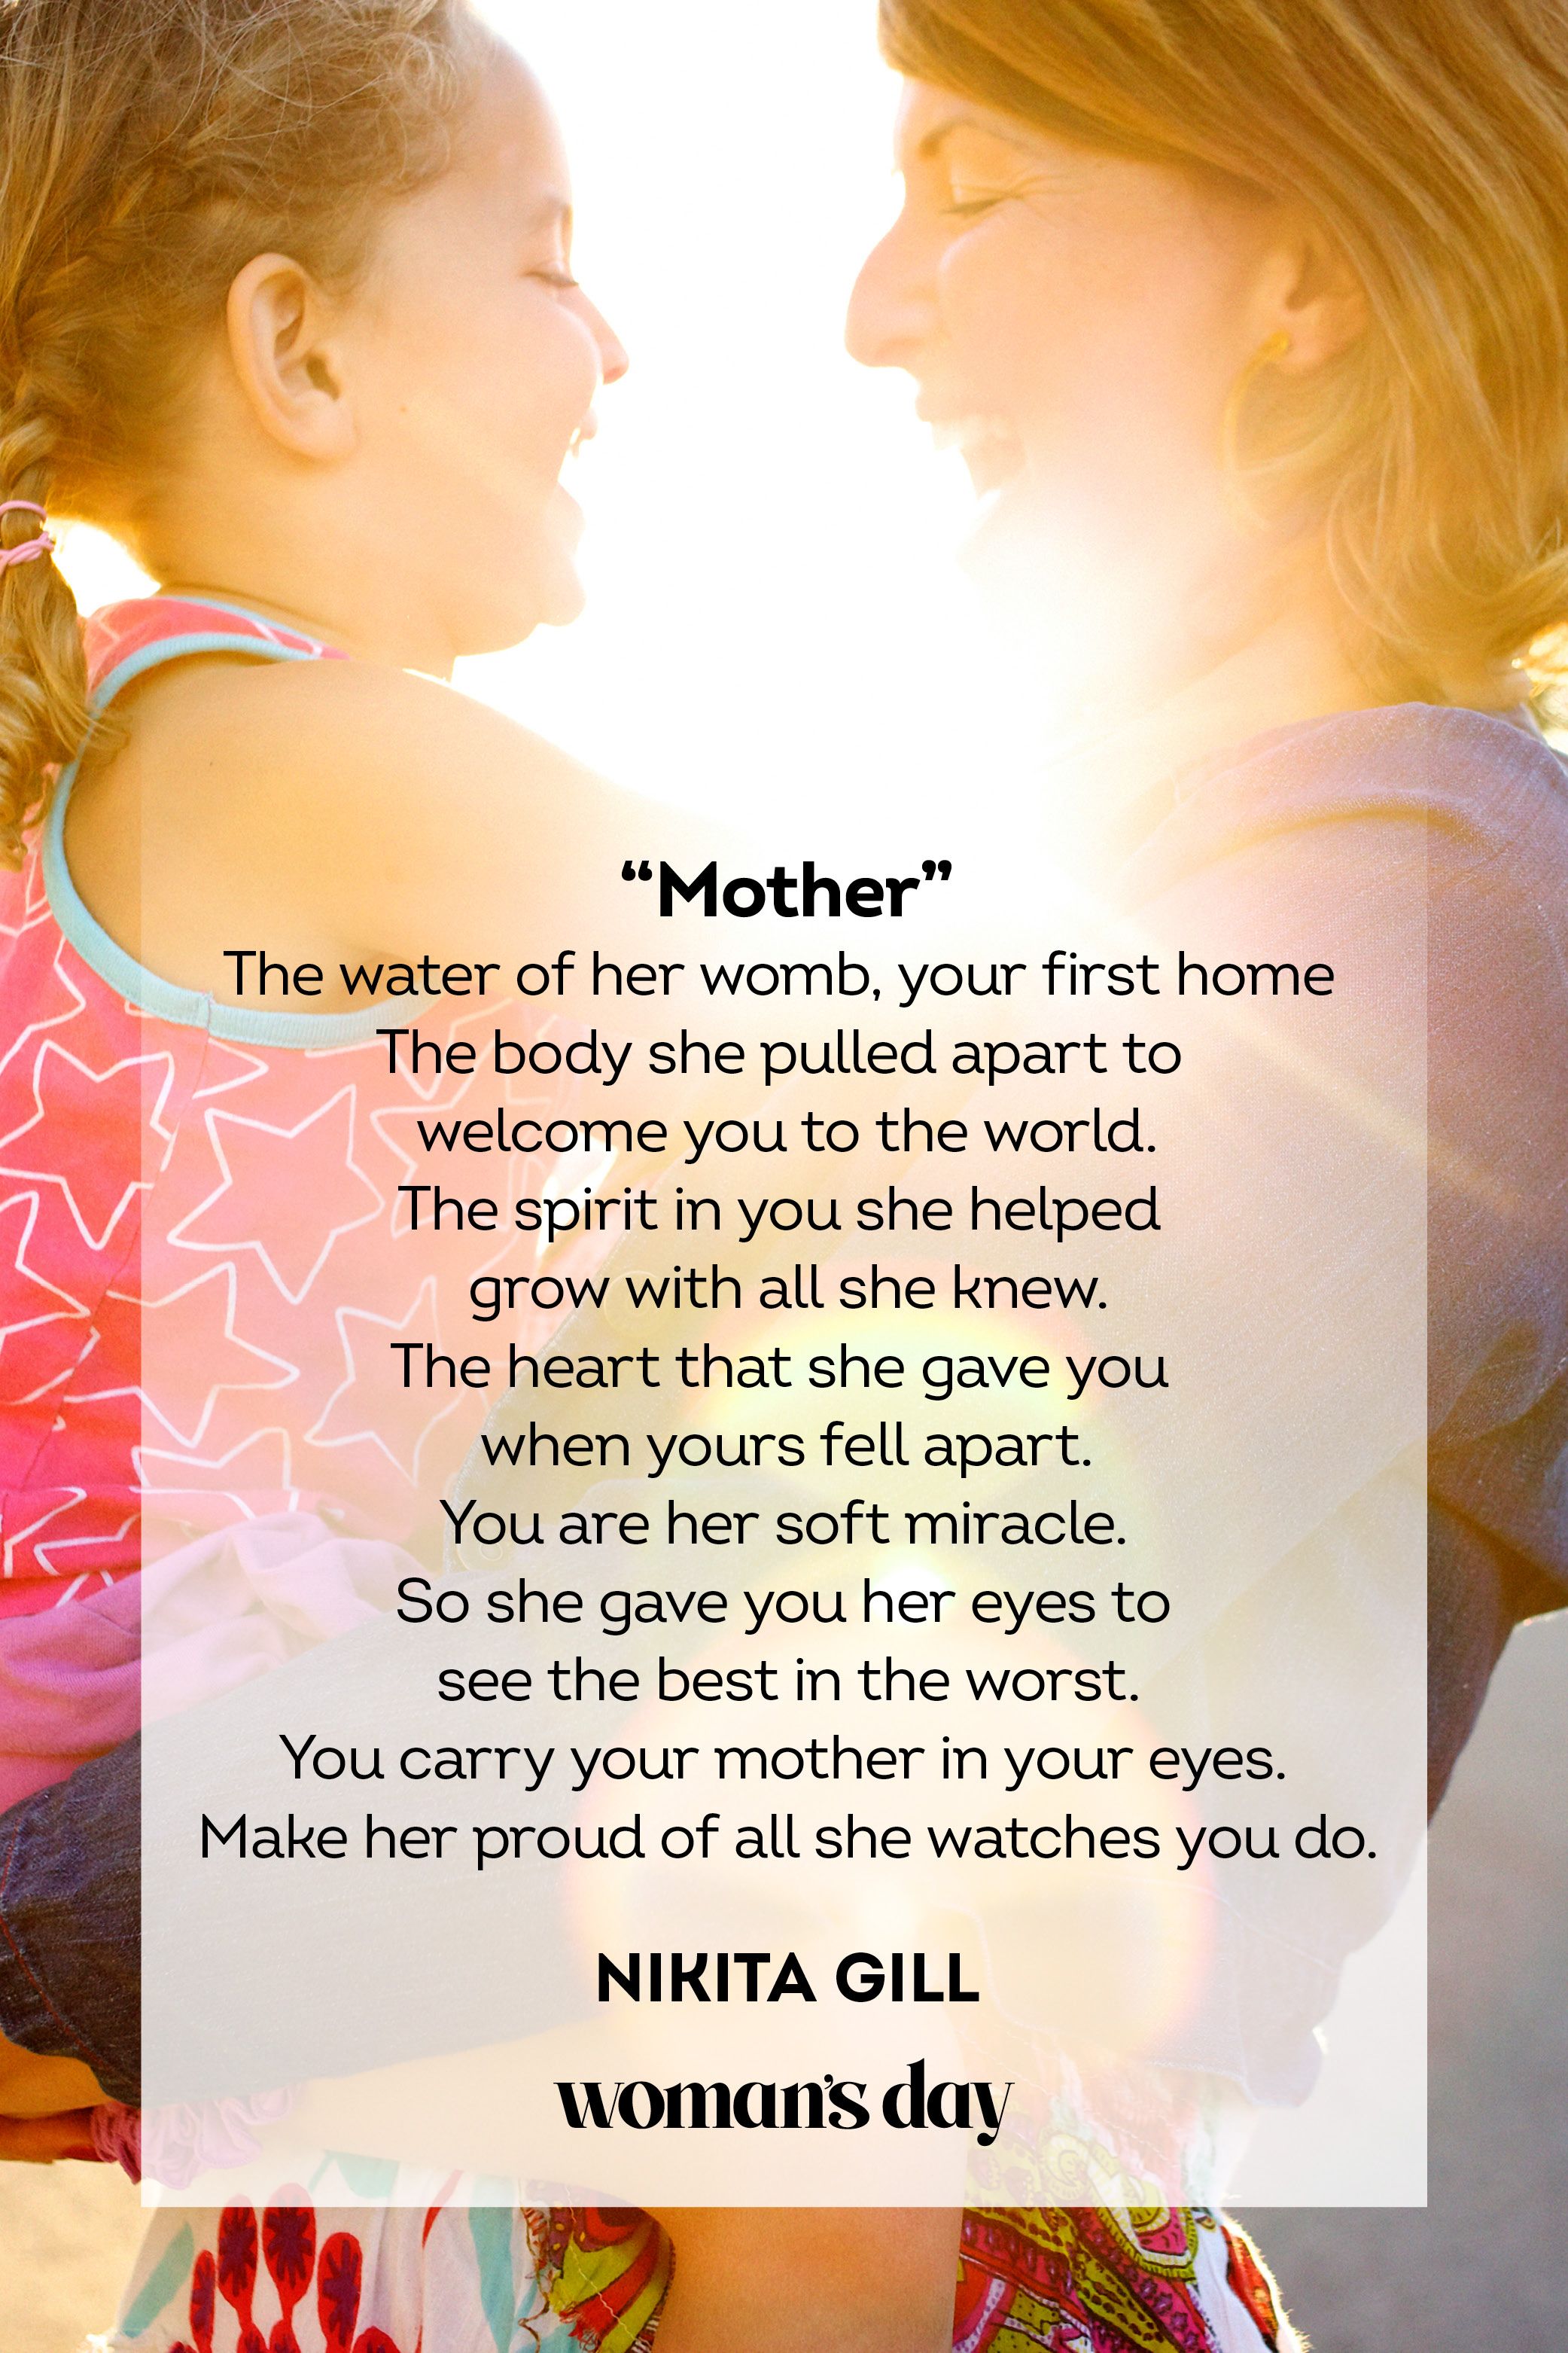 Mother how are you today lyrics